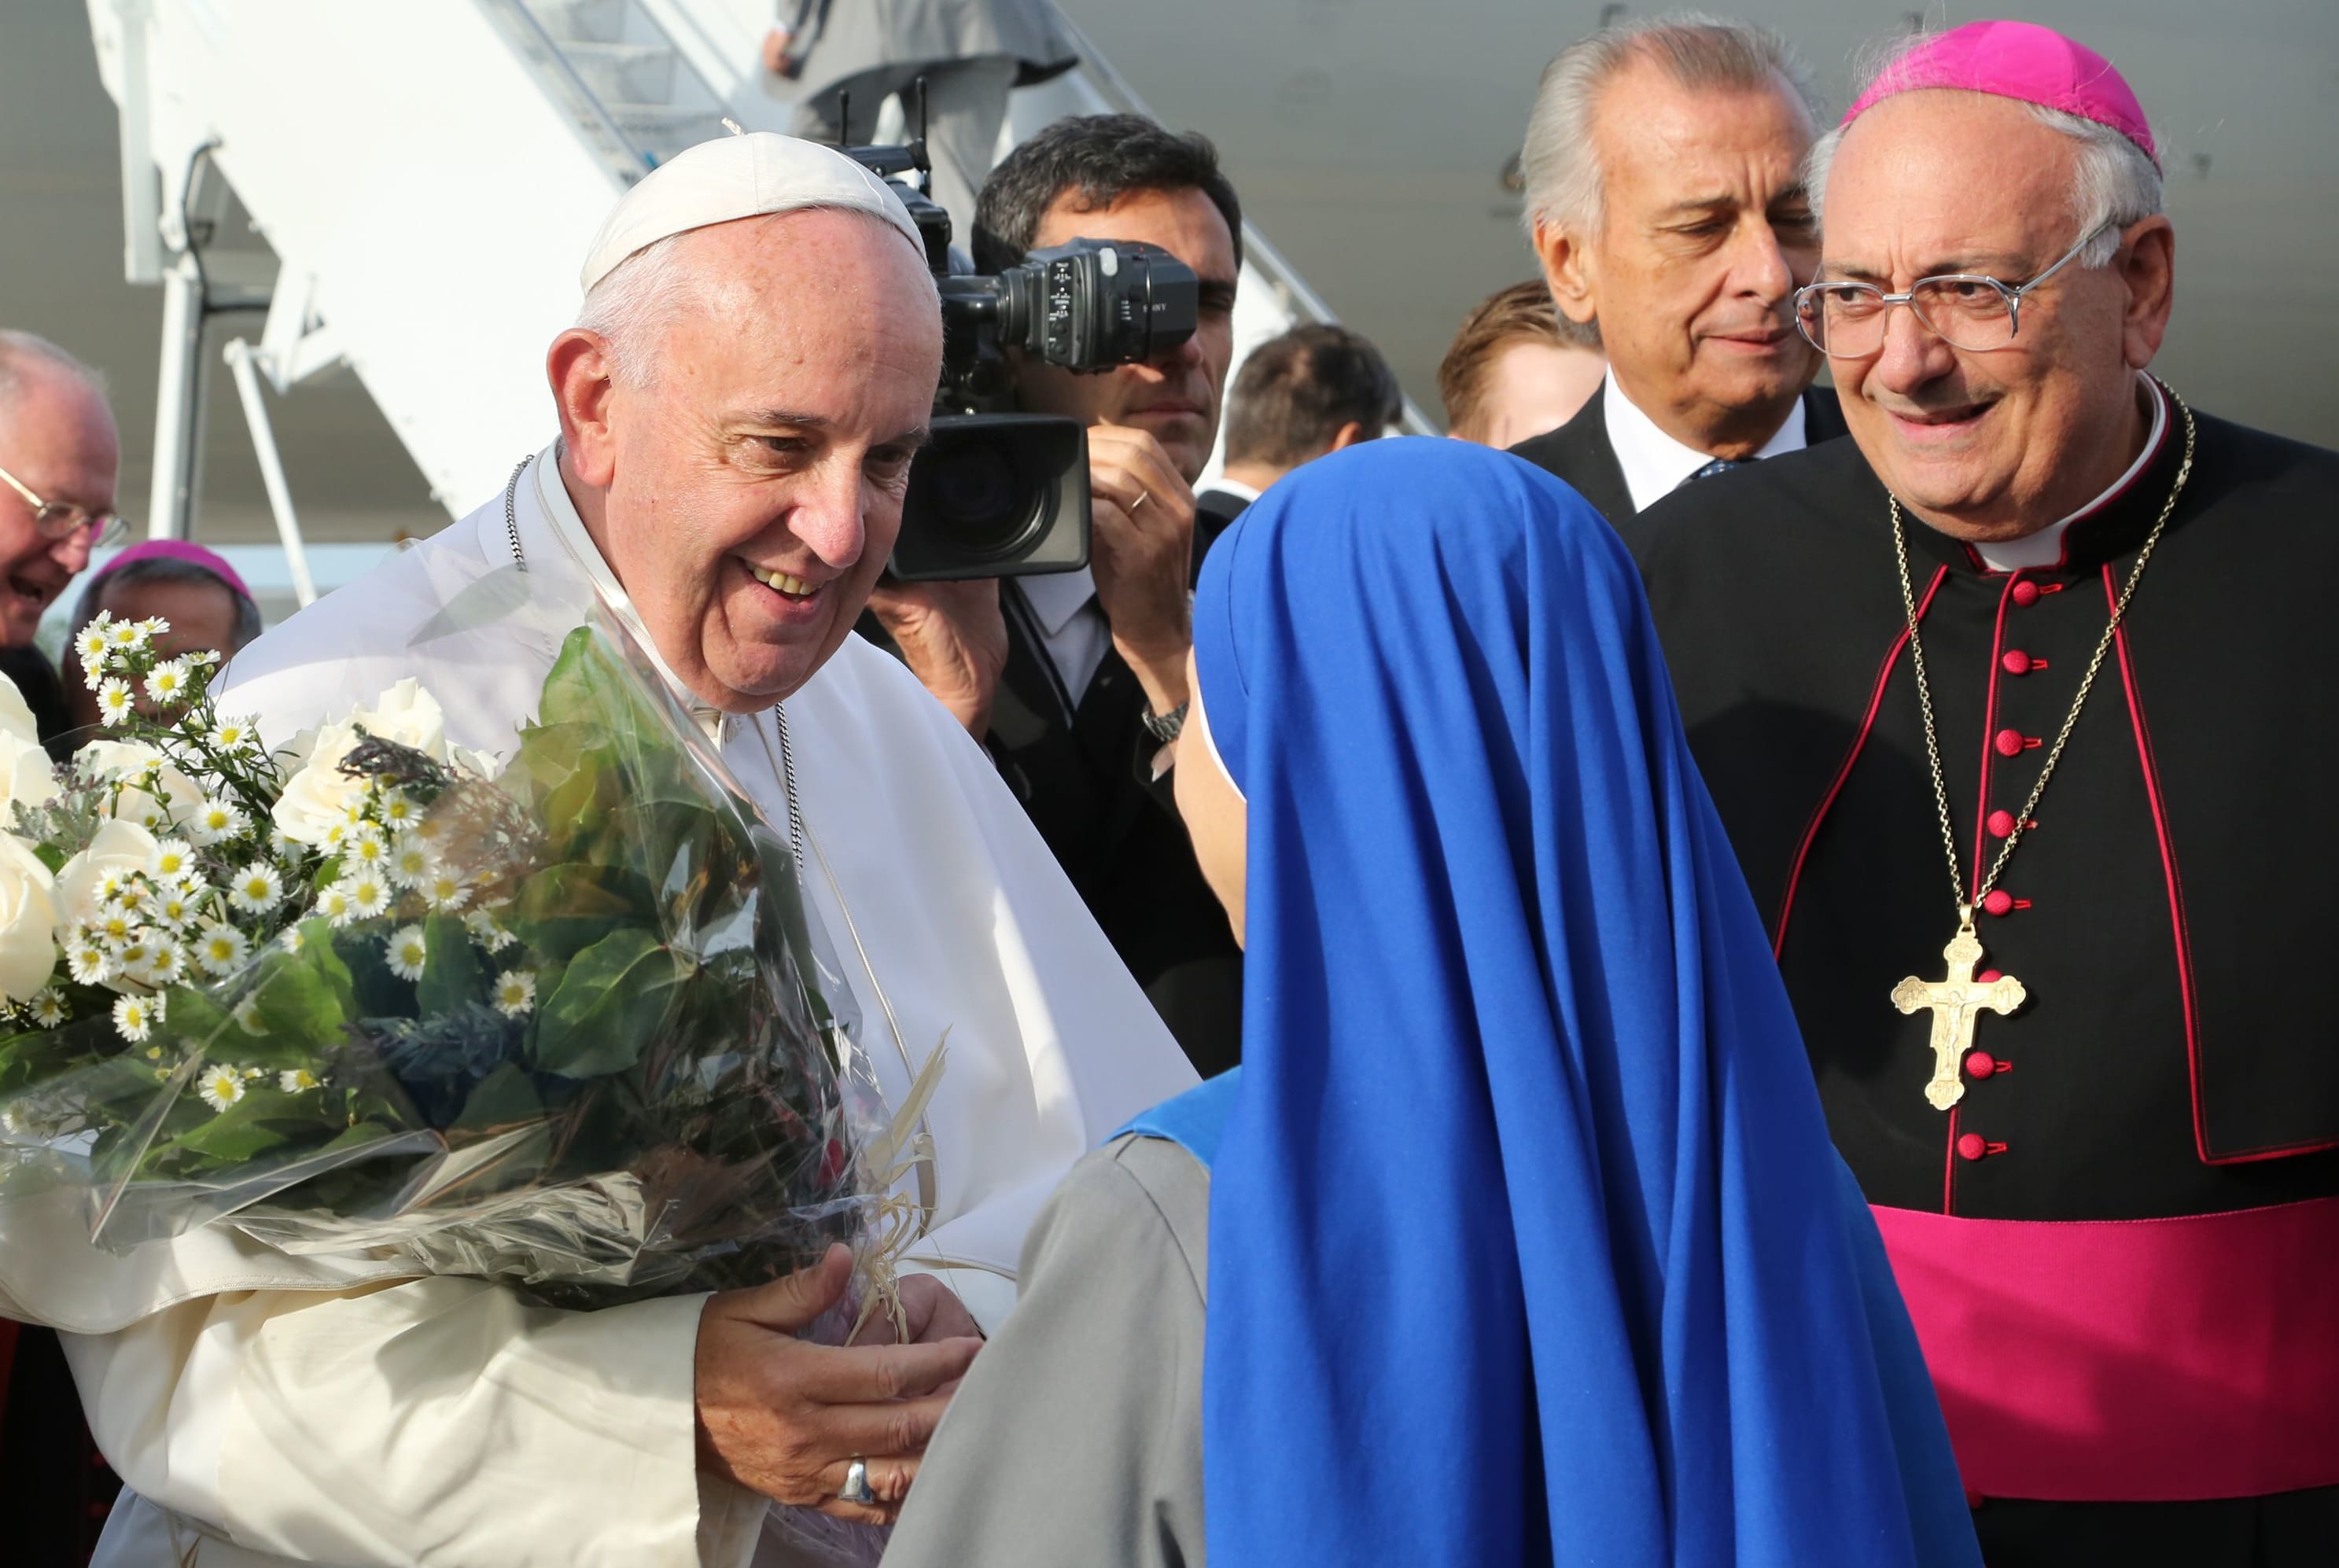 Pope Francis at New York's John F. Kennedy International Airport on September 26, 2015, greeted by nuns from the Monastery of the Precious Blood in Brooklyn, who presented the pontiff with a gift of flowers. Bishop Nicholas DiMarzio (R) of Brooklyn